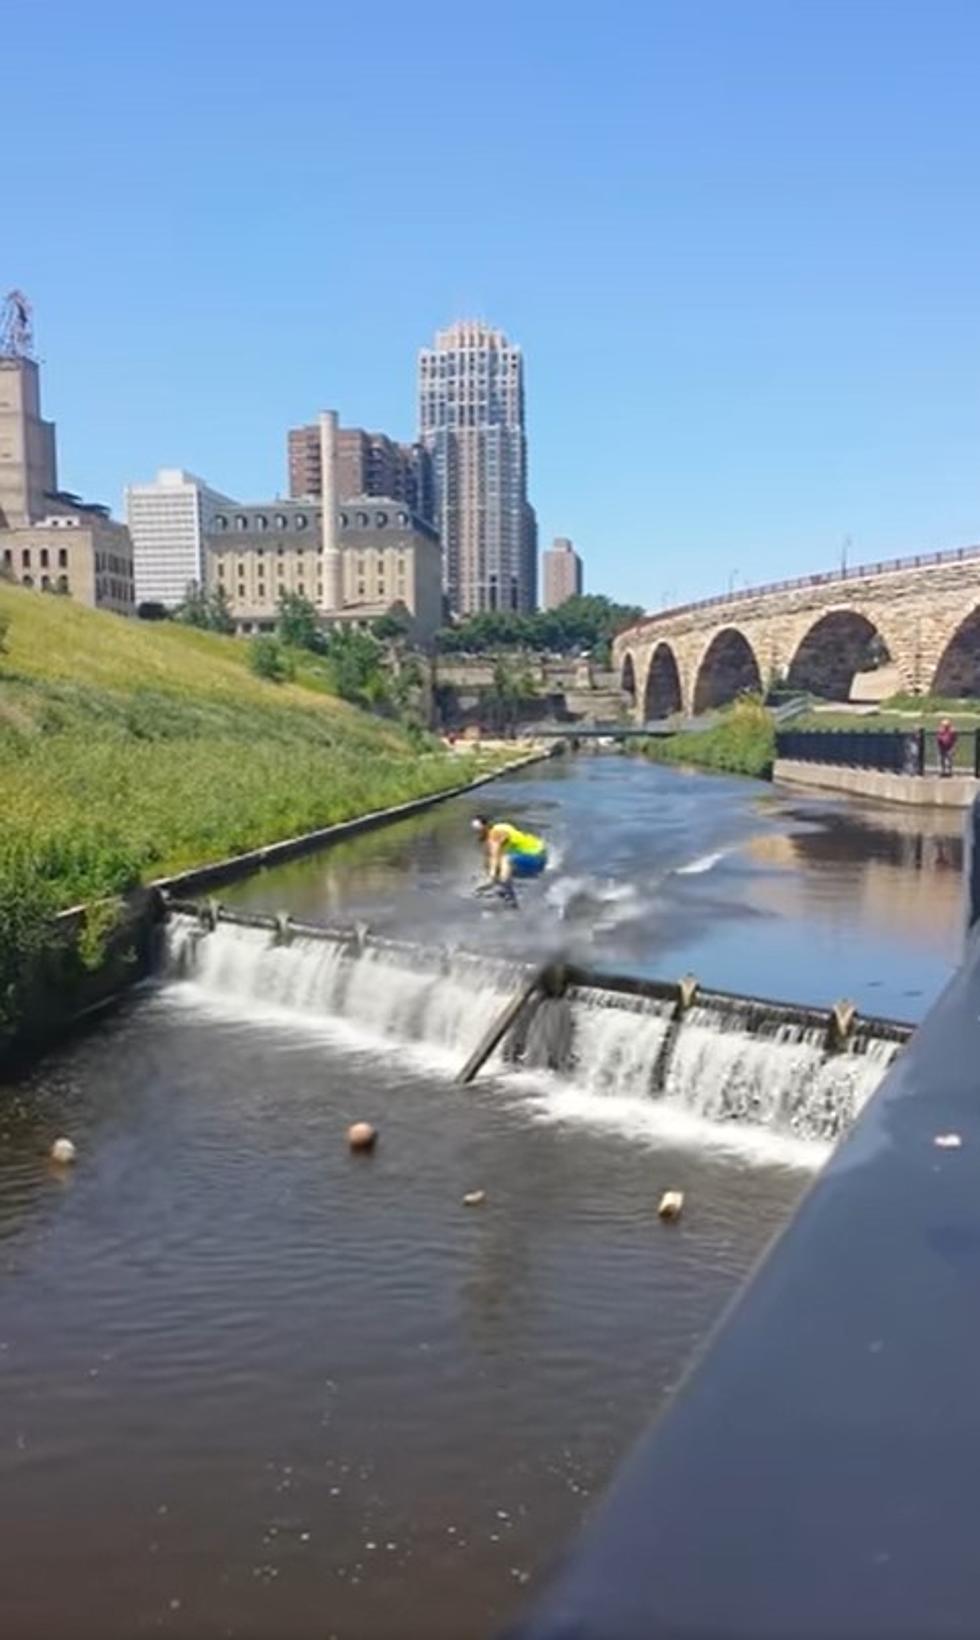 Is This Legal? Would You Dare Try &#8216;Surfing&#8217; Down This Minneapolis Falls?